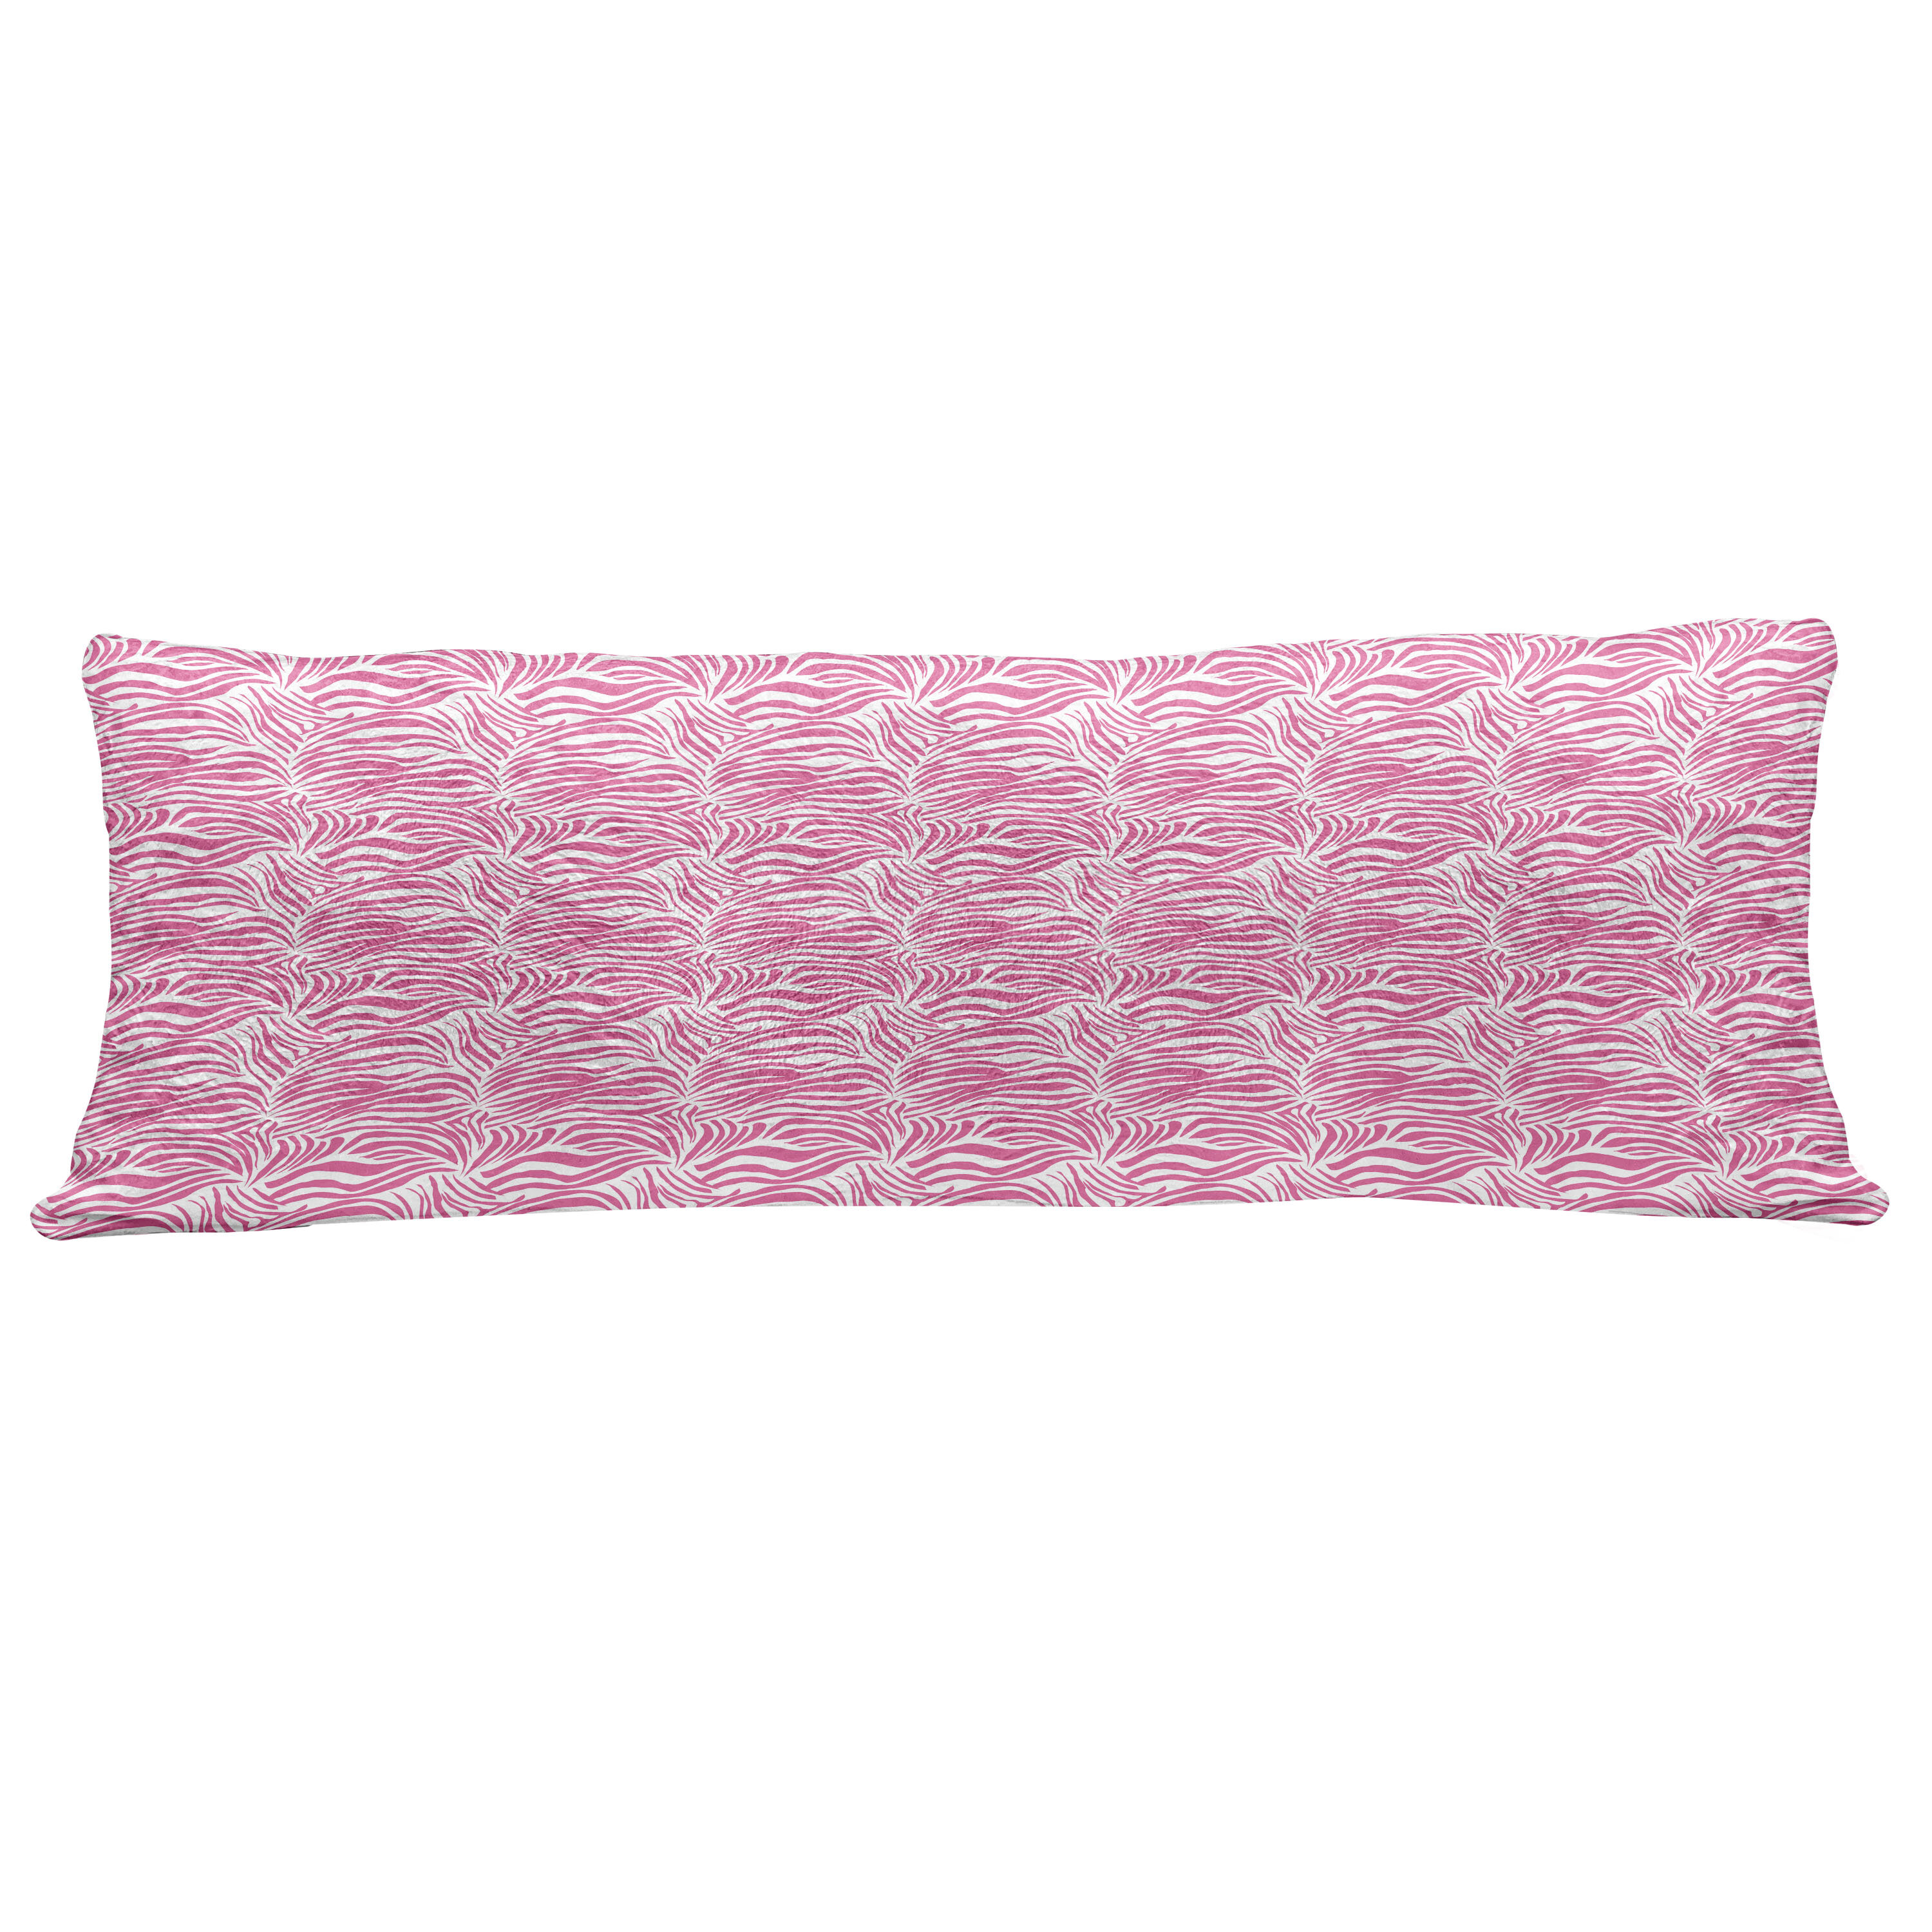 Zippered Hot Pink and White Zebra Design Reversible Soft Pillow Cover Case 